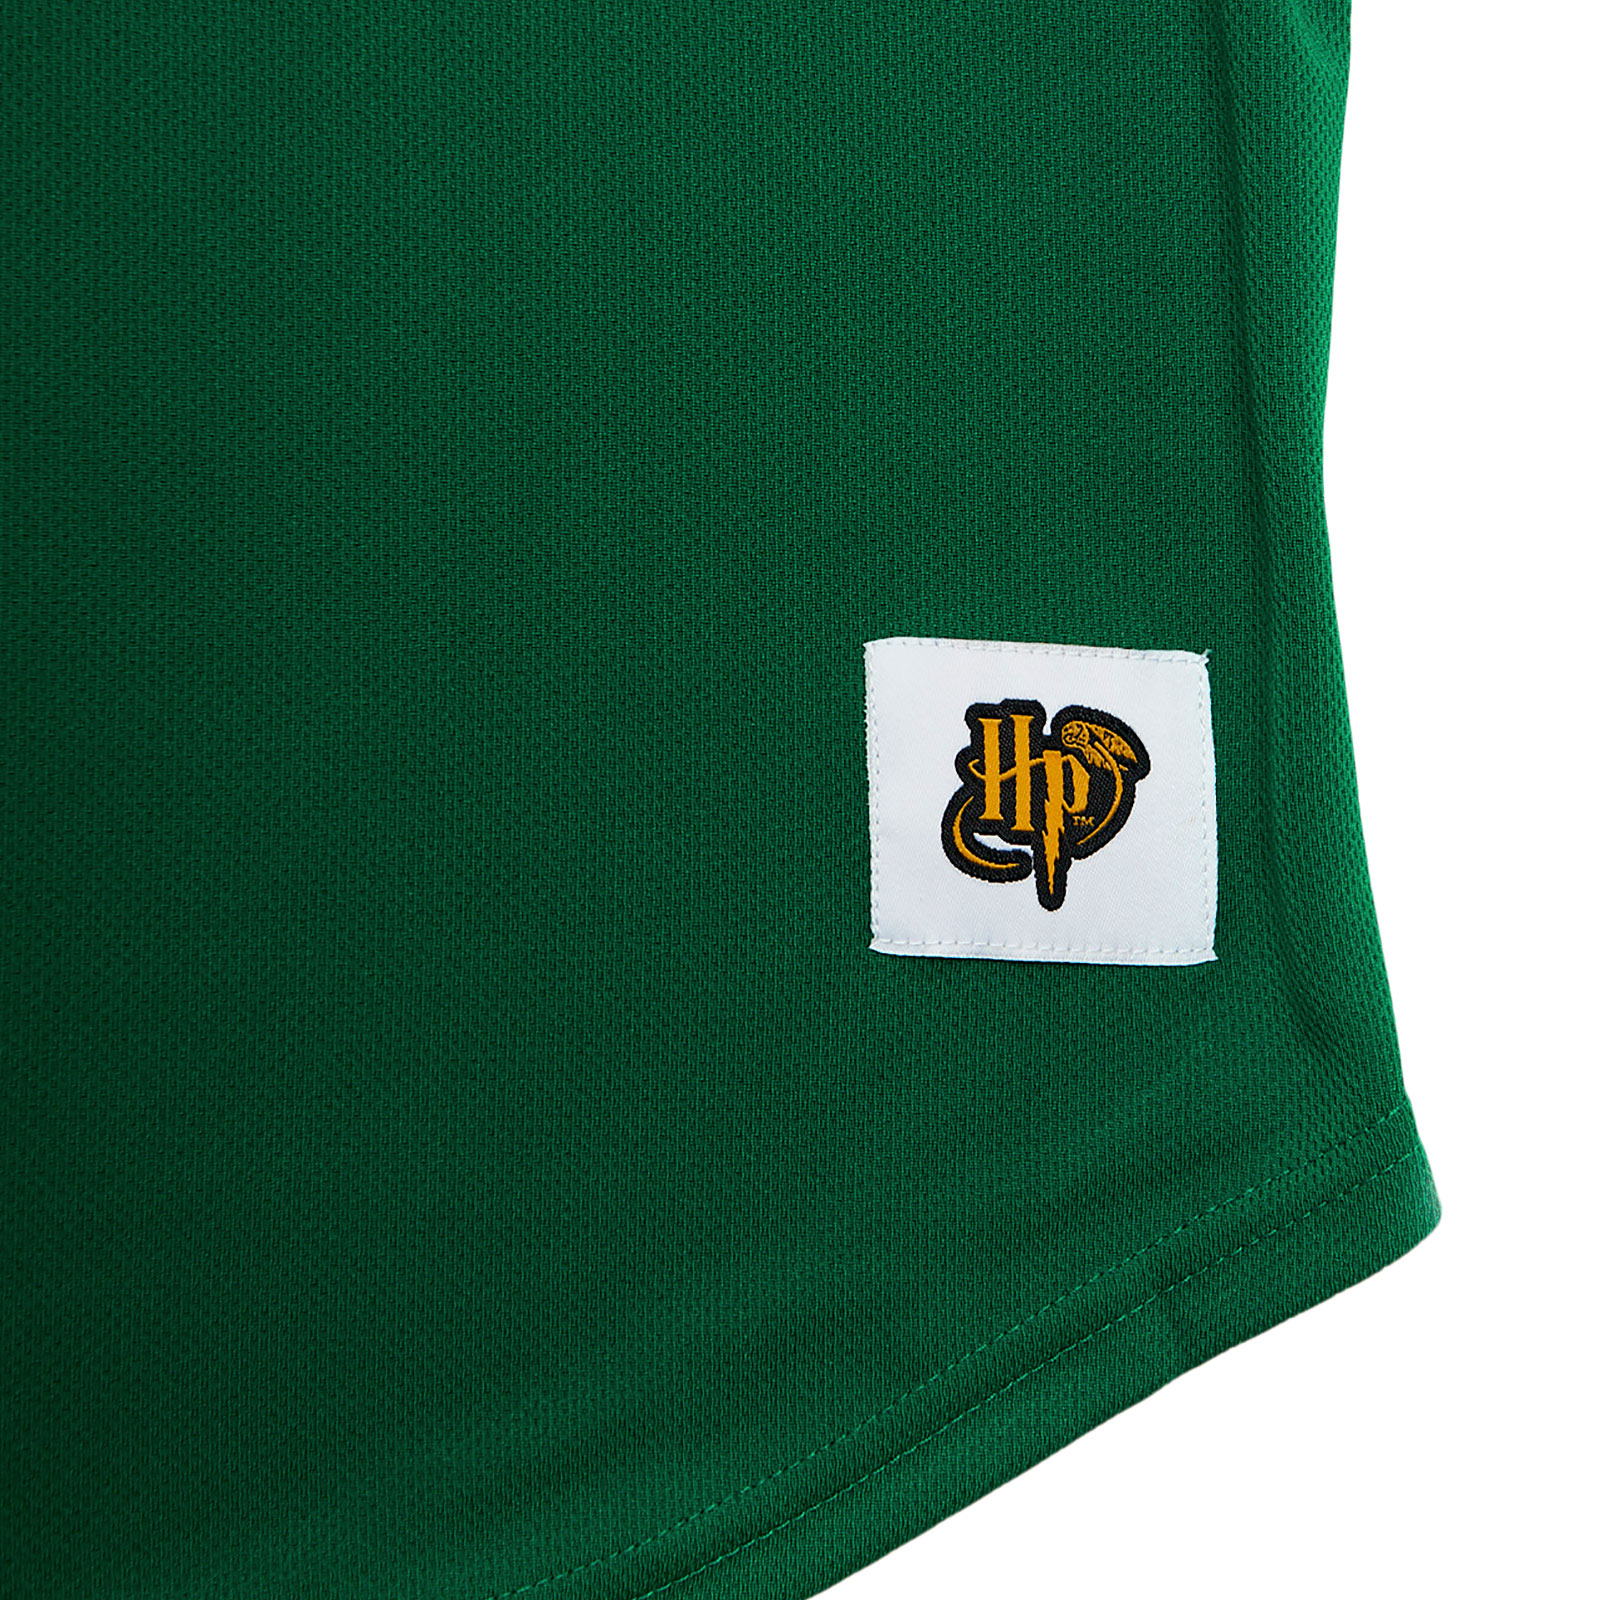 Harry Potter - Quidditch Team Slytherin T-Shirt